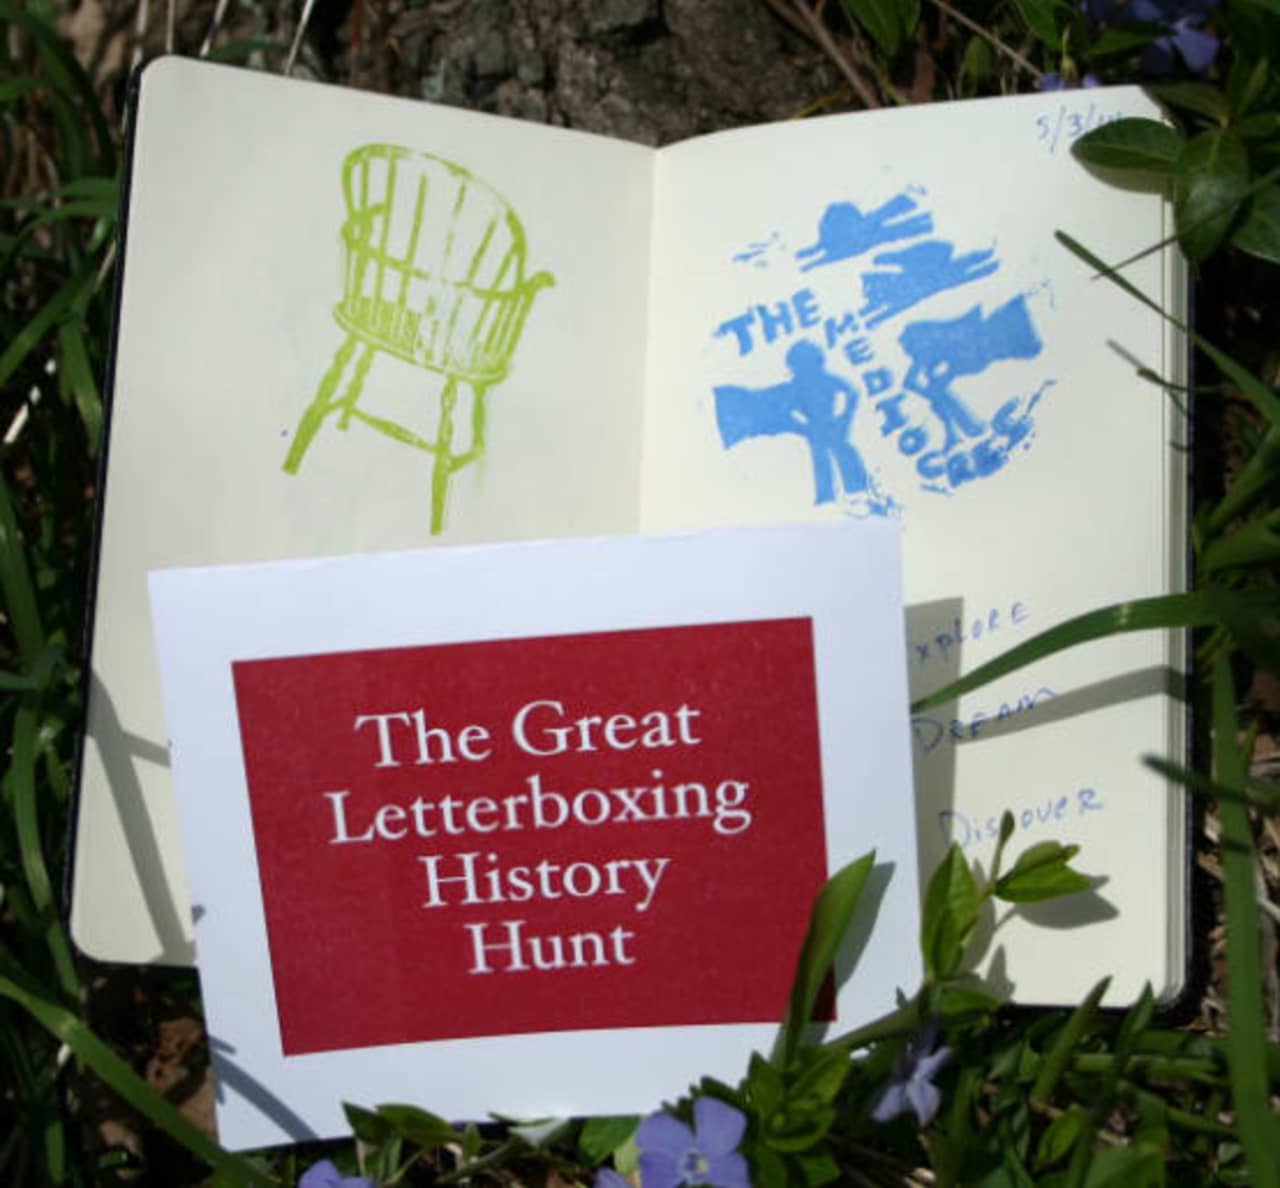 History seekers are encouraged to take part in the Second Annual Great Letterboxing History Hunt from May 15-31 throughout Fairfield County.